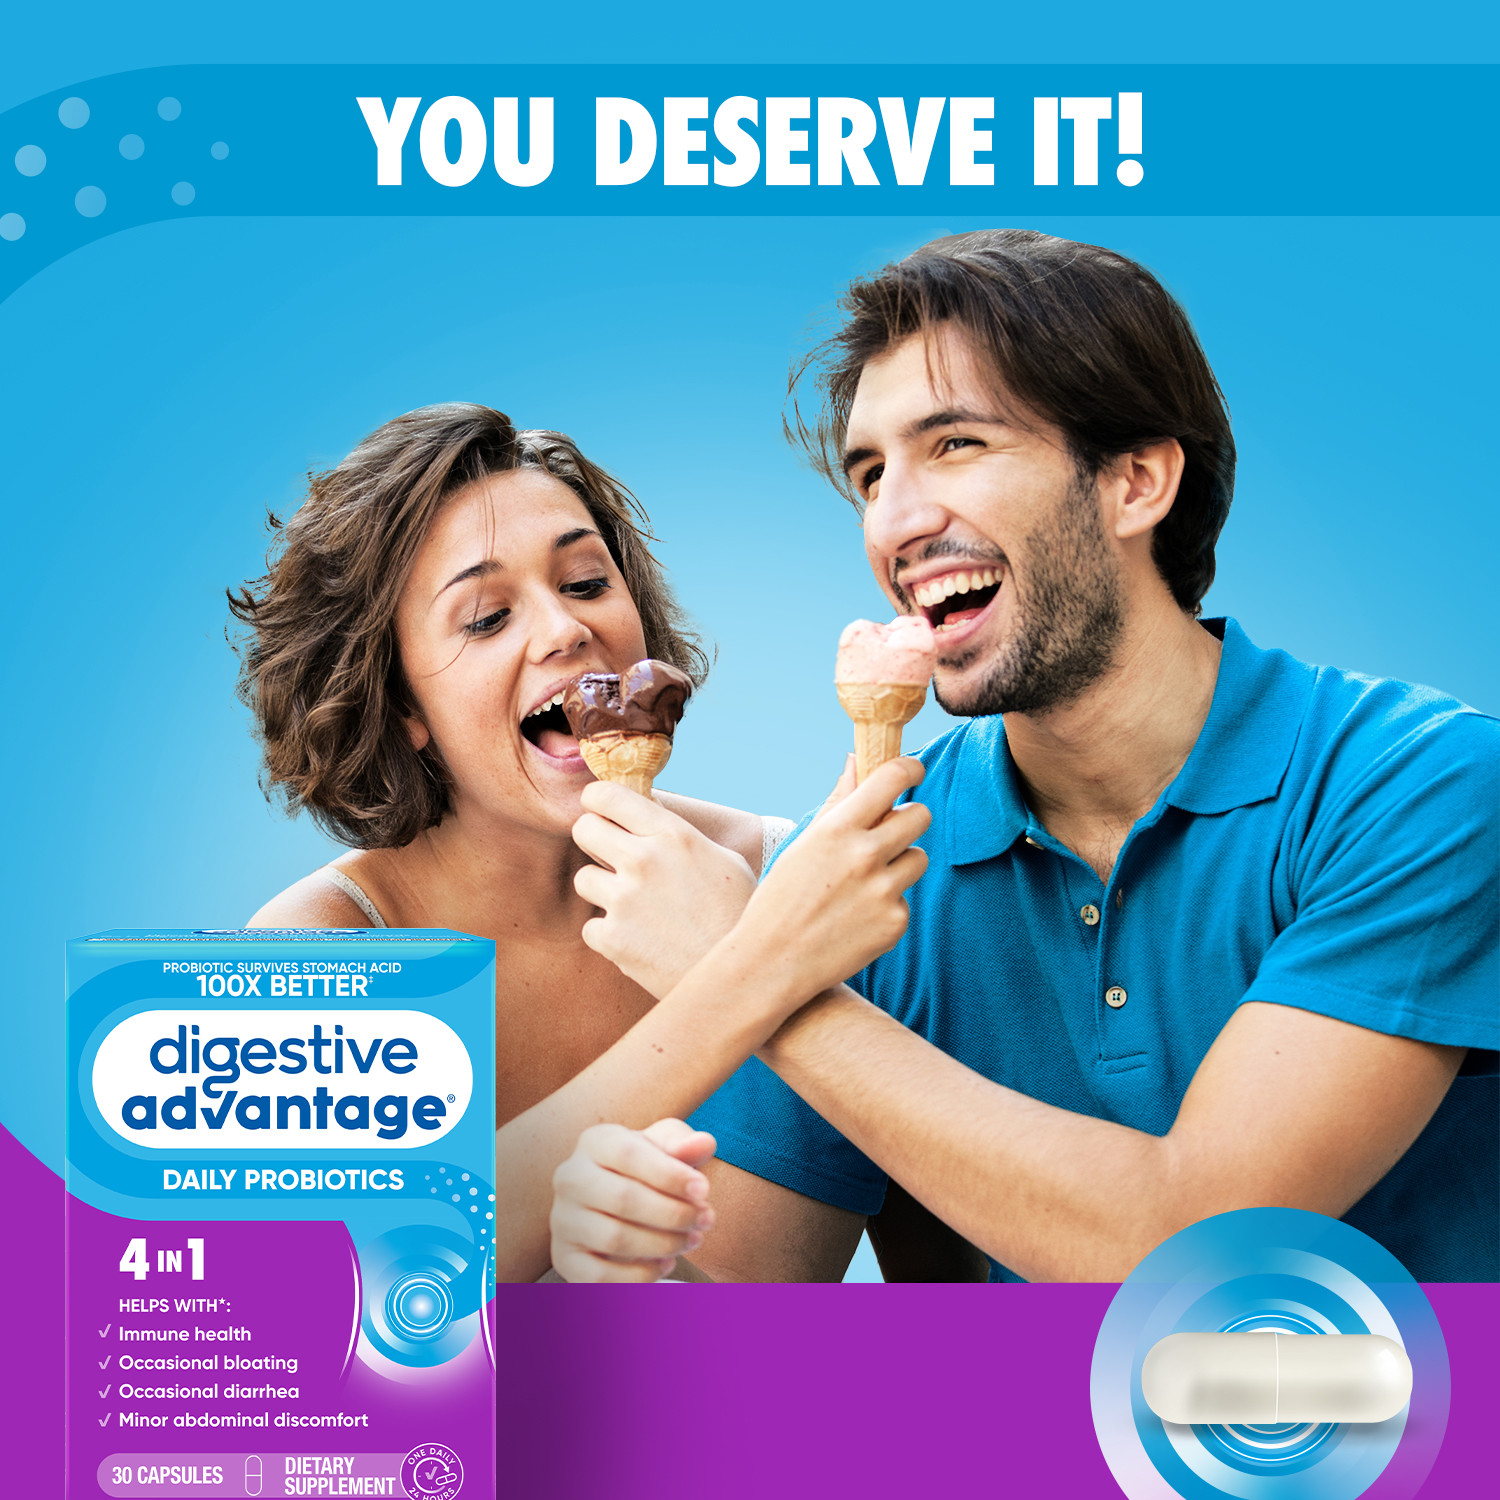 Digestive Advantage Daily Probiotic, Survives Better than 50 Billion - 30 Capsules - image 5 of 11